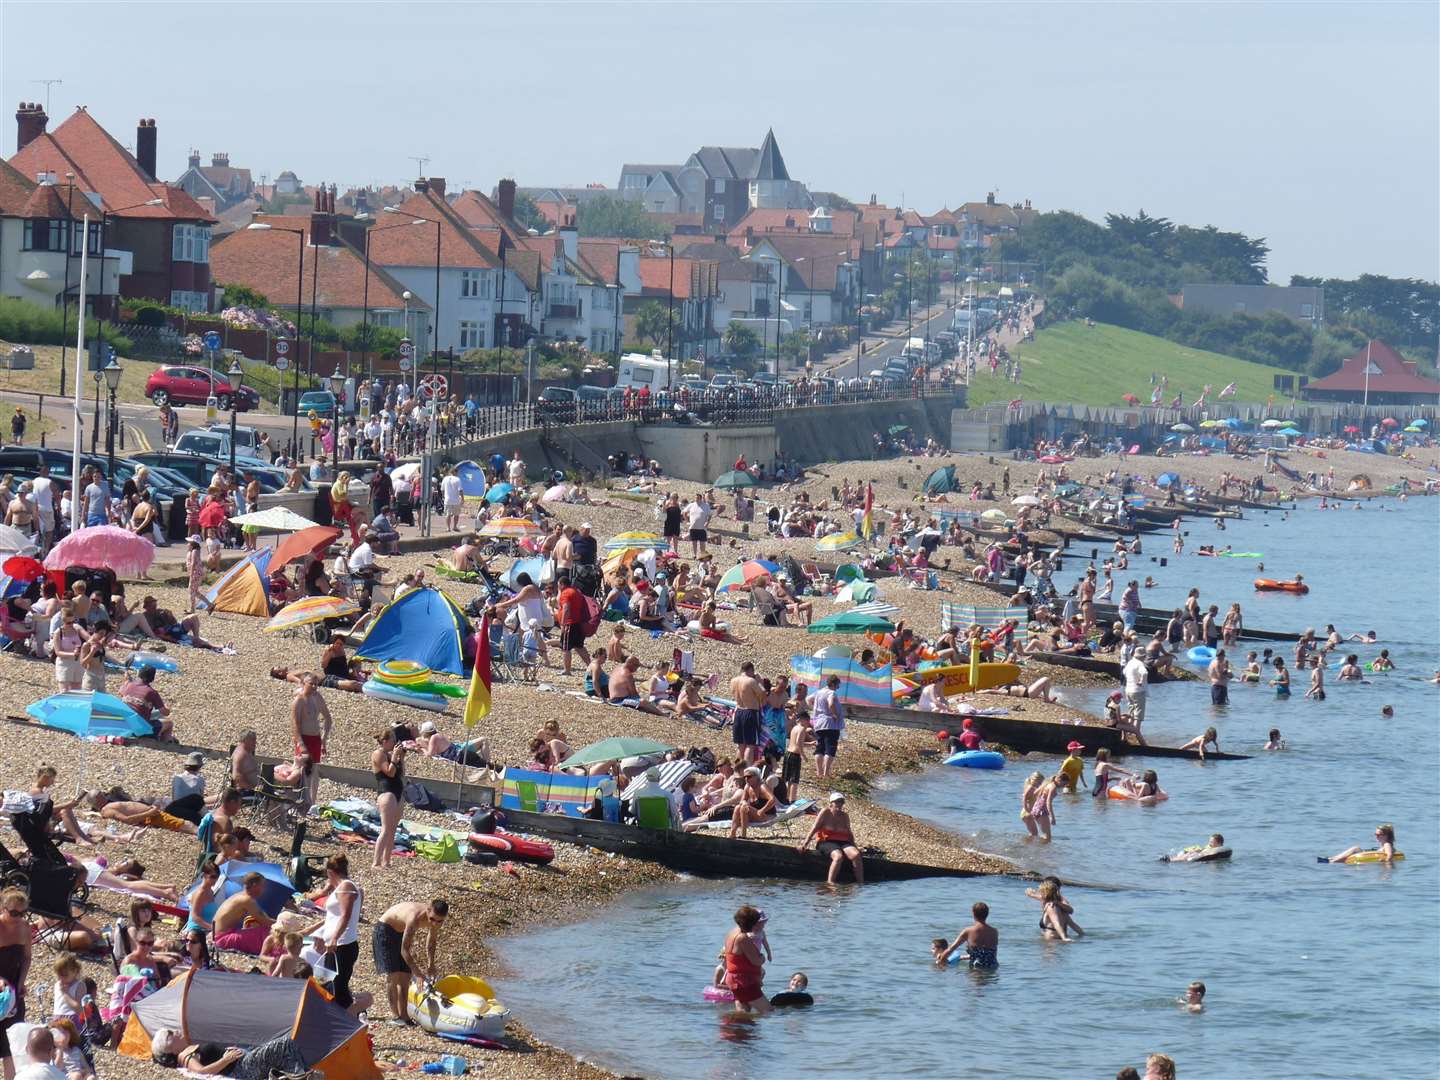 Herne Bay beach could be popular this weekend